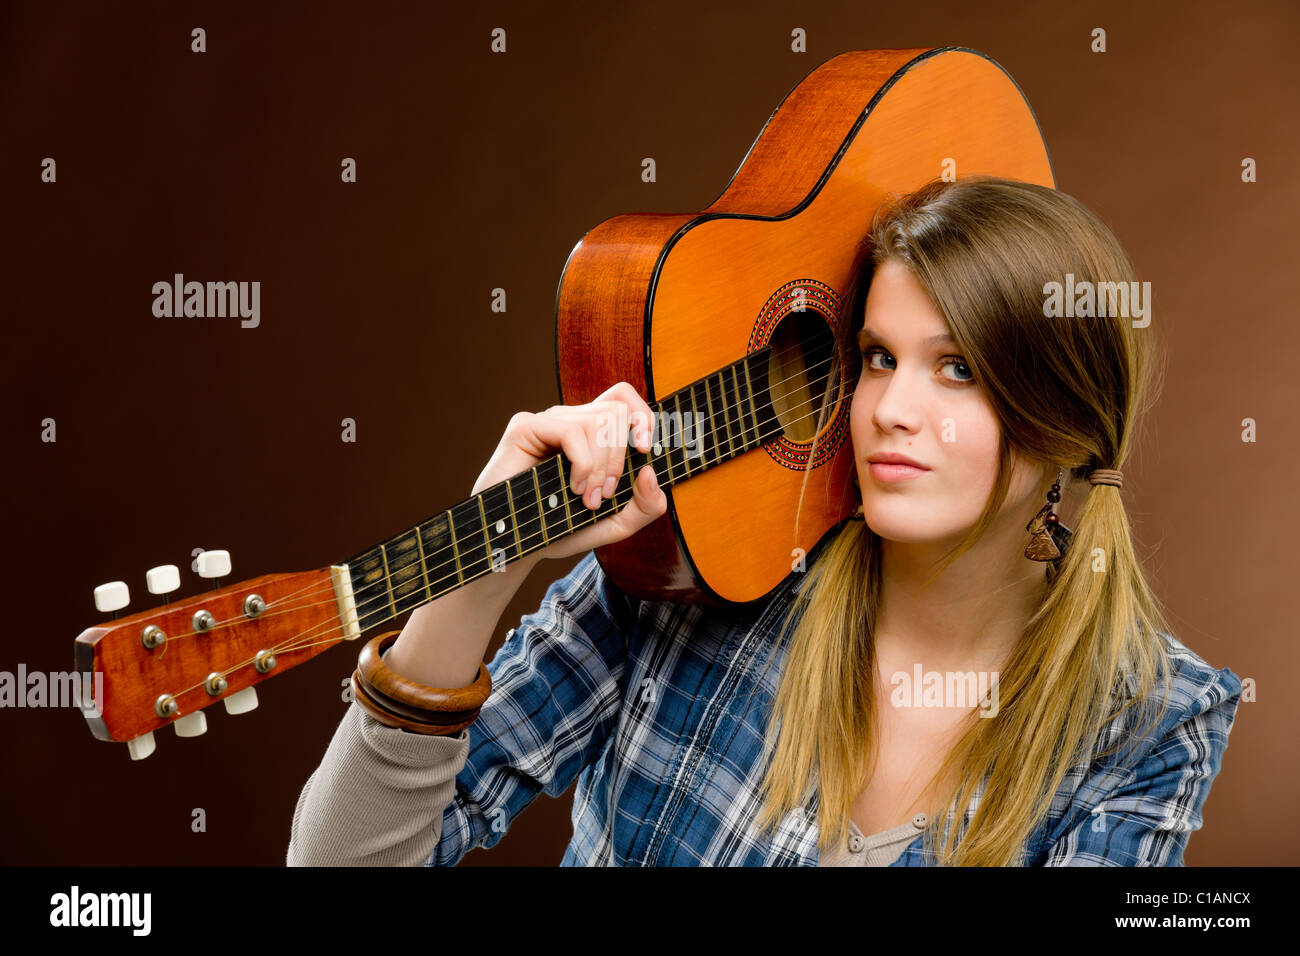 Multiethnic Girl Poses with Electric Guitar 16423589 Stock Photo at Vecteezy